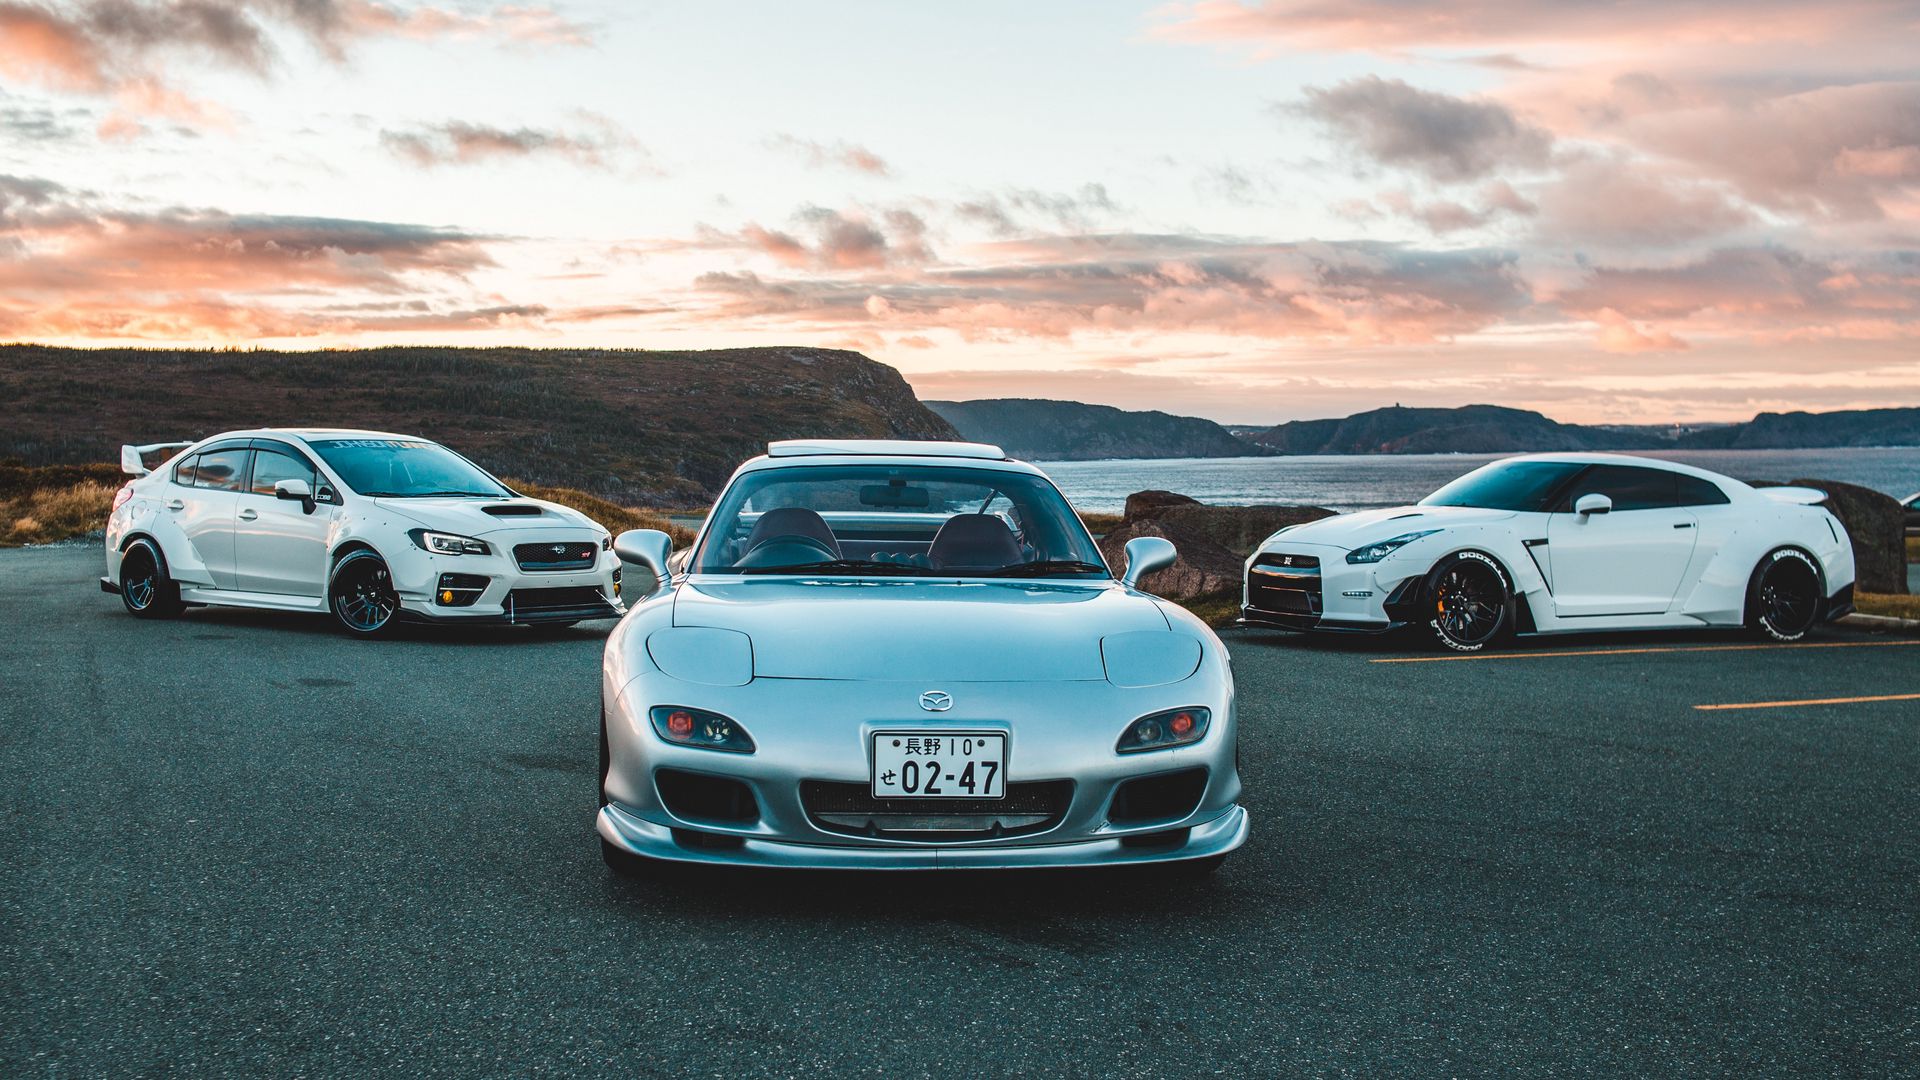 Mazda Rx7 Photos, Download The BEST Free Mazda Rx7 Stock Photos & HD Images